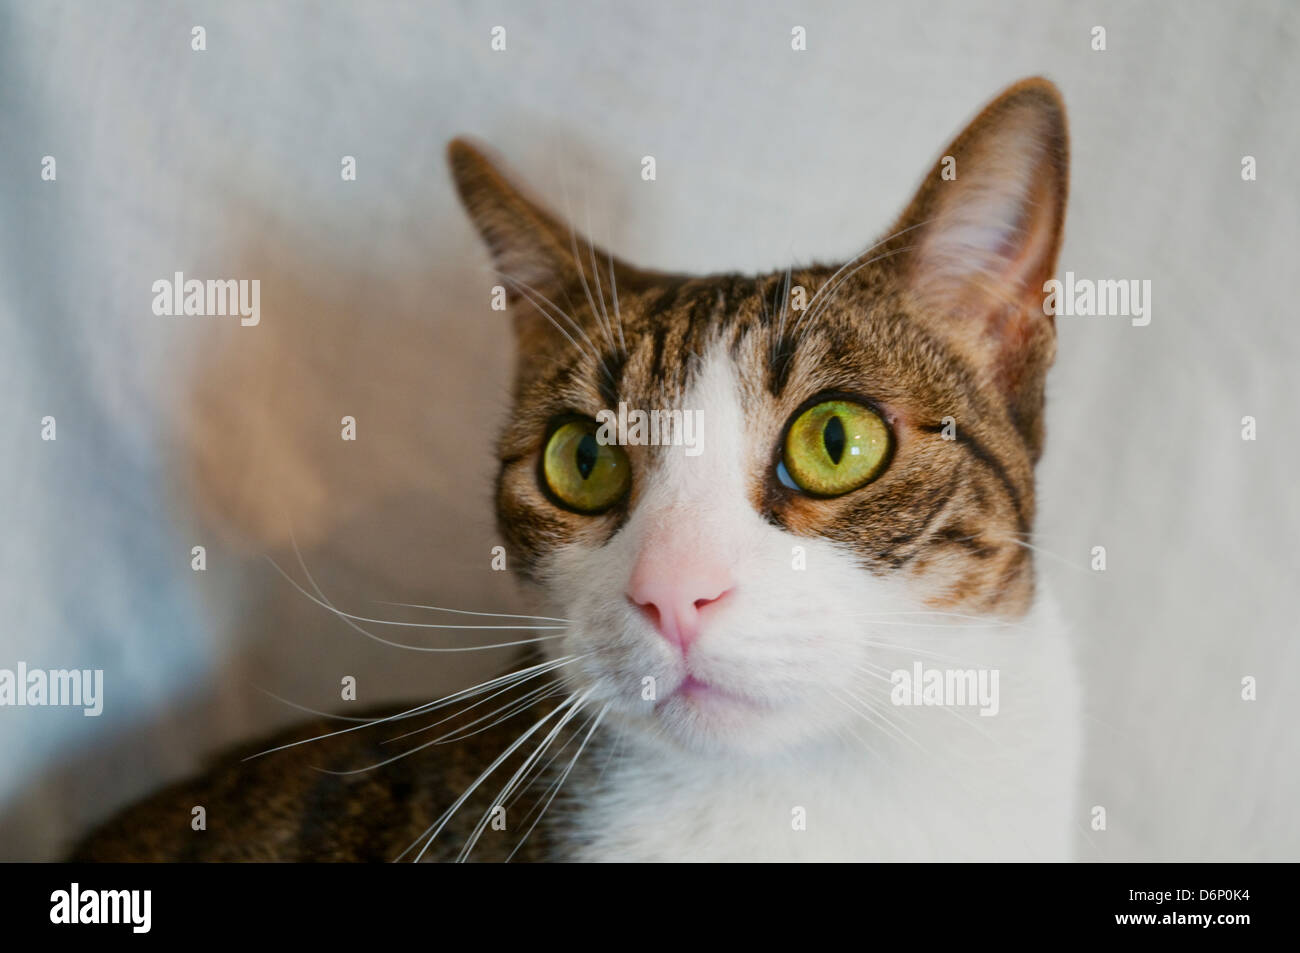 Tabby and white cat looking at the camera. Close view. Stock Photo